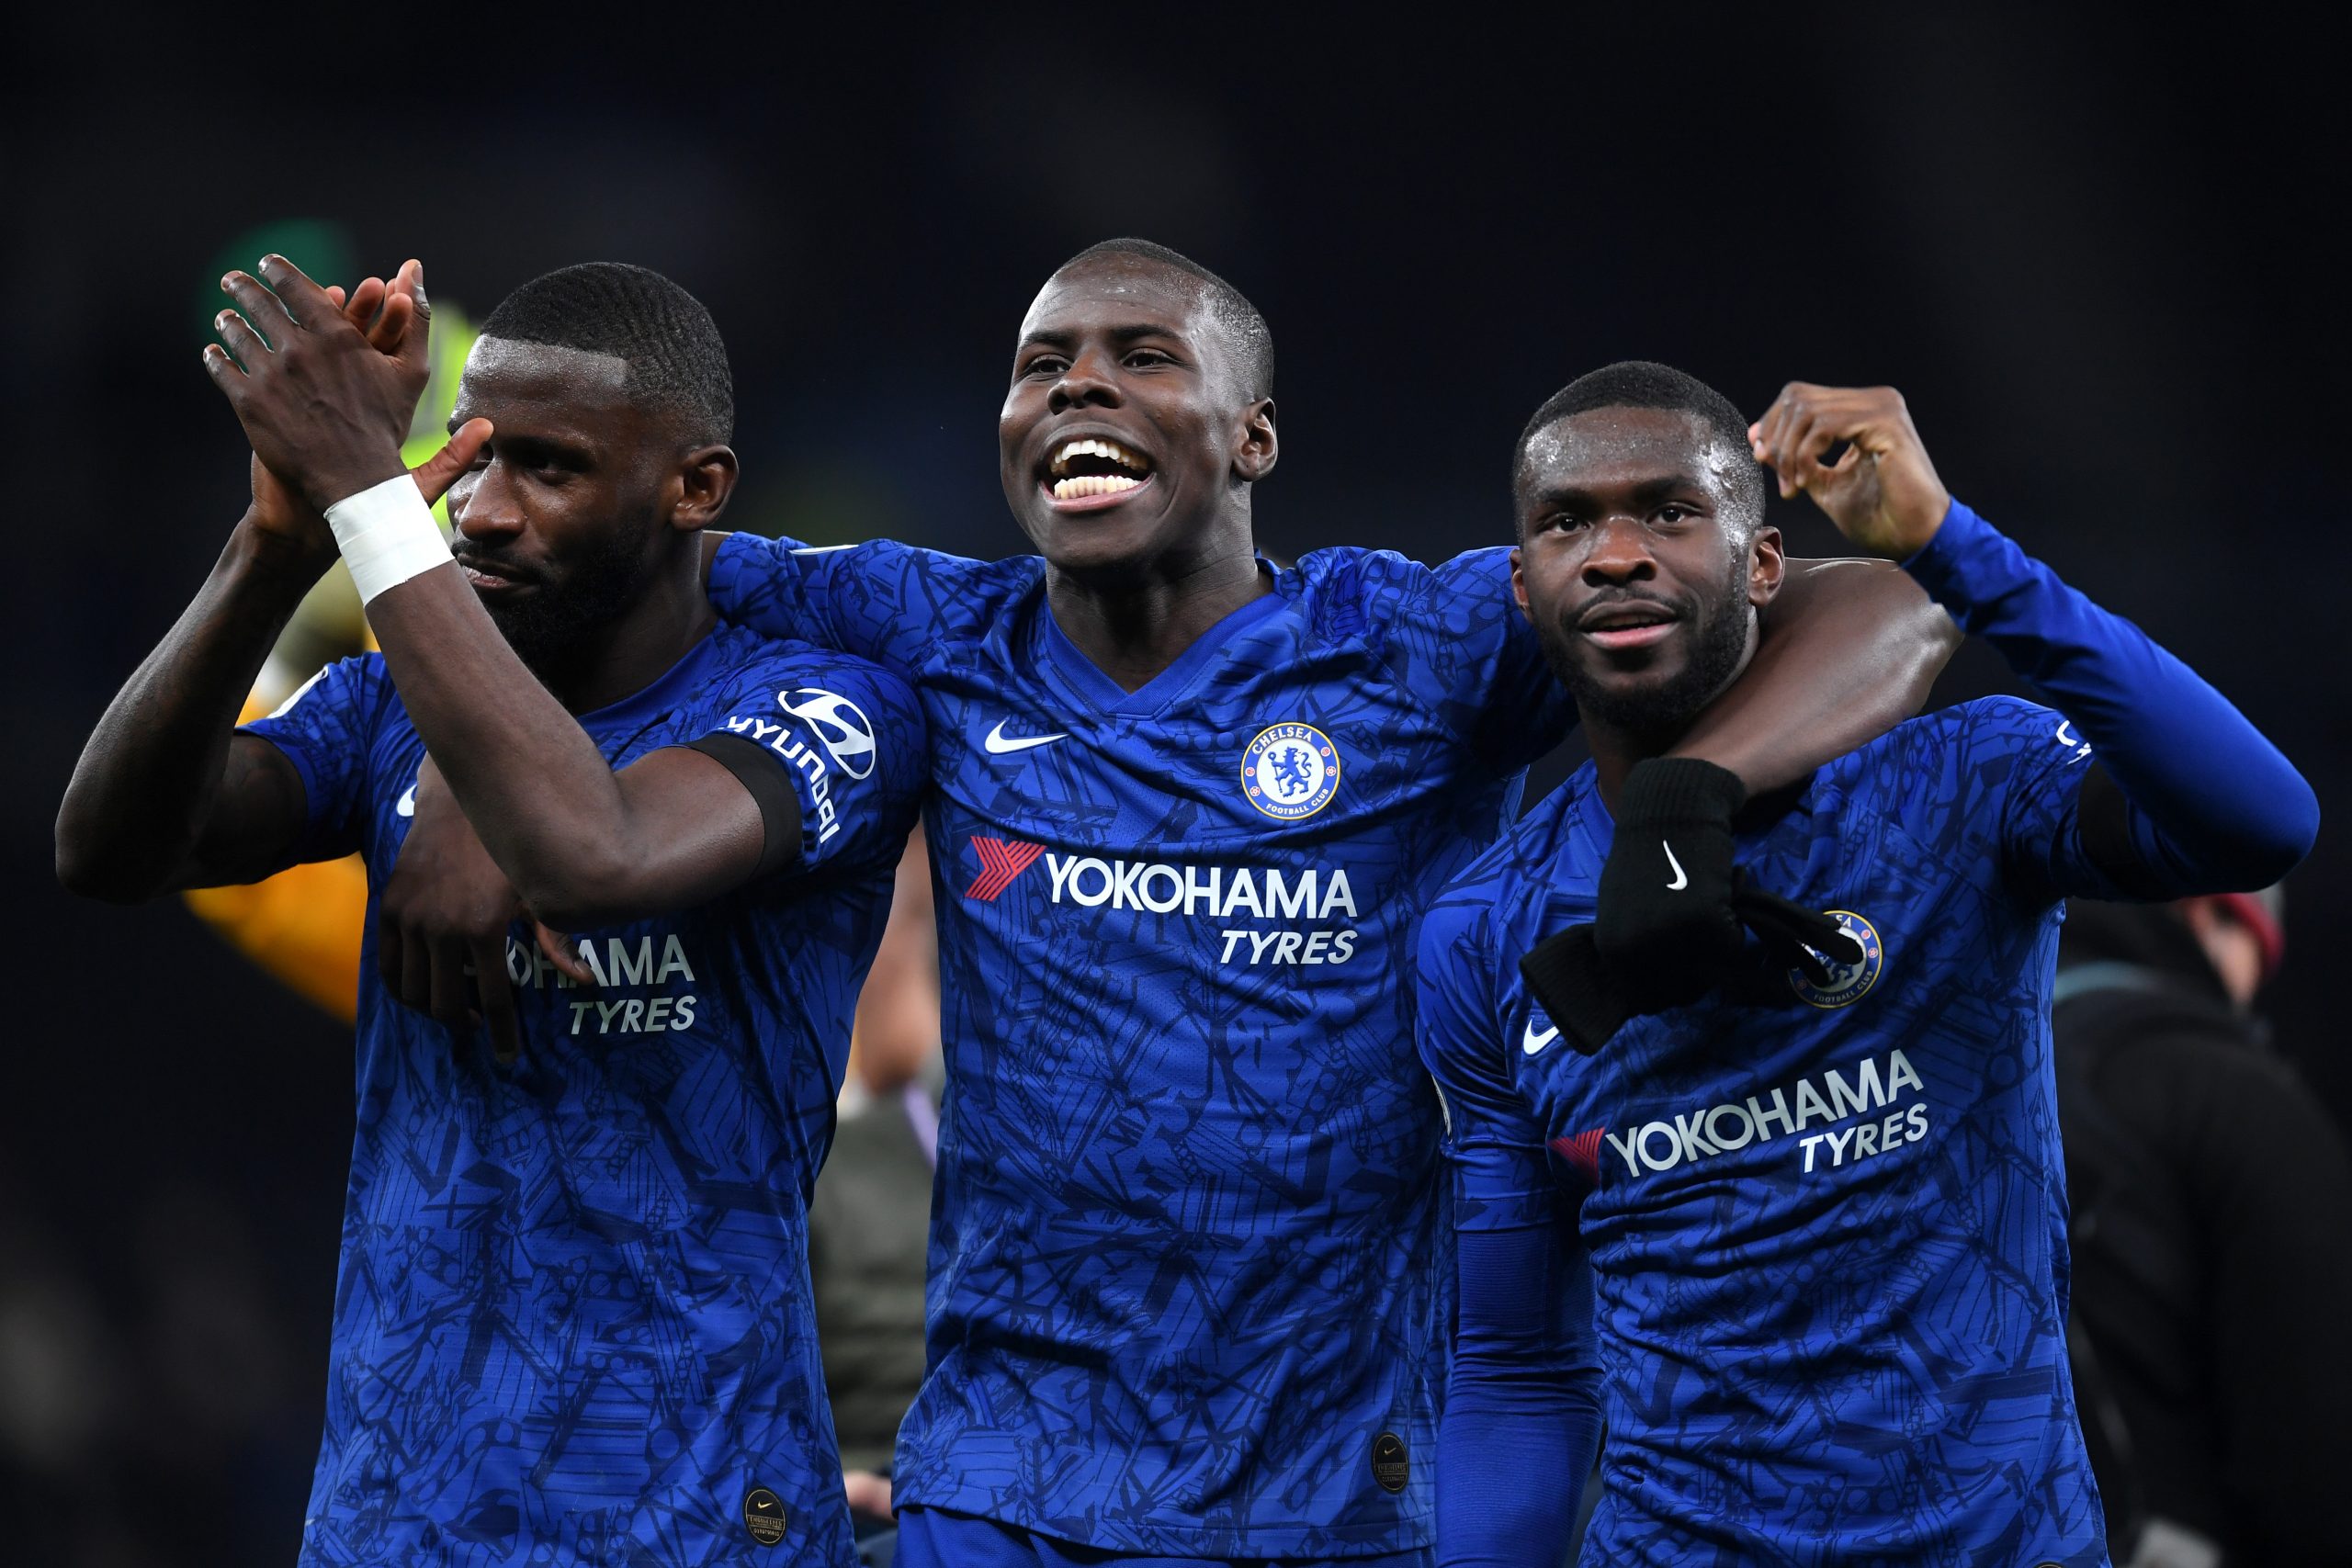 Tottenham Hotspur showing interest in recruiting Kurt Zouma who is seen celebrating in the picture